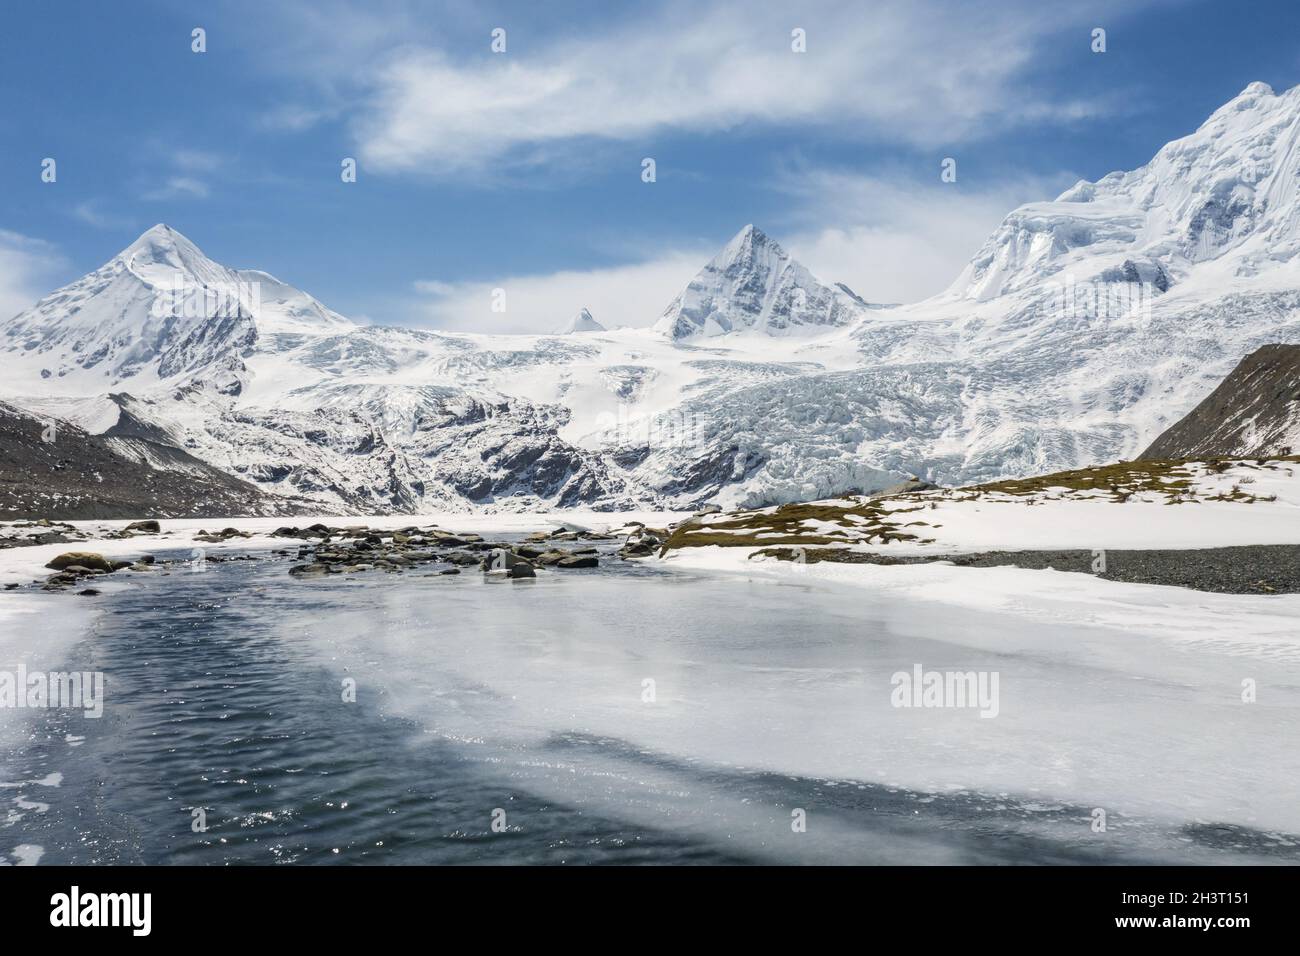 Snow mountain and glacial landscape Stock Photo